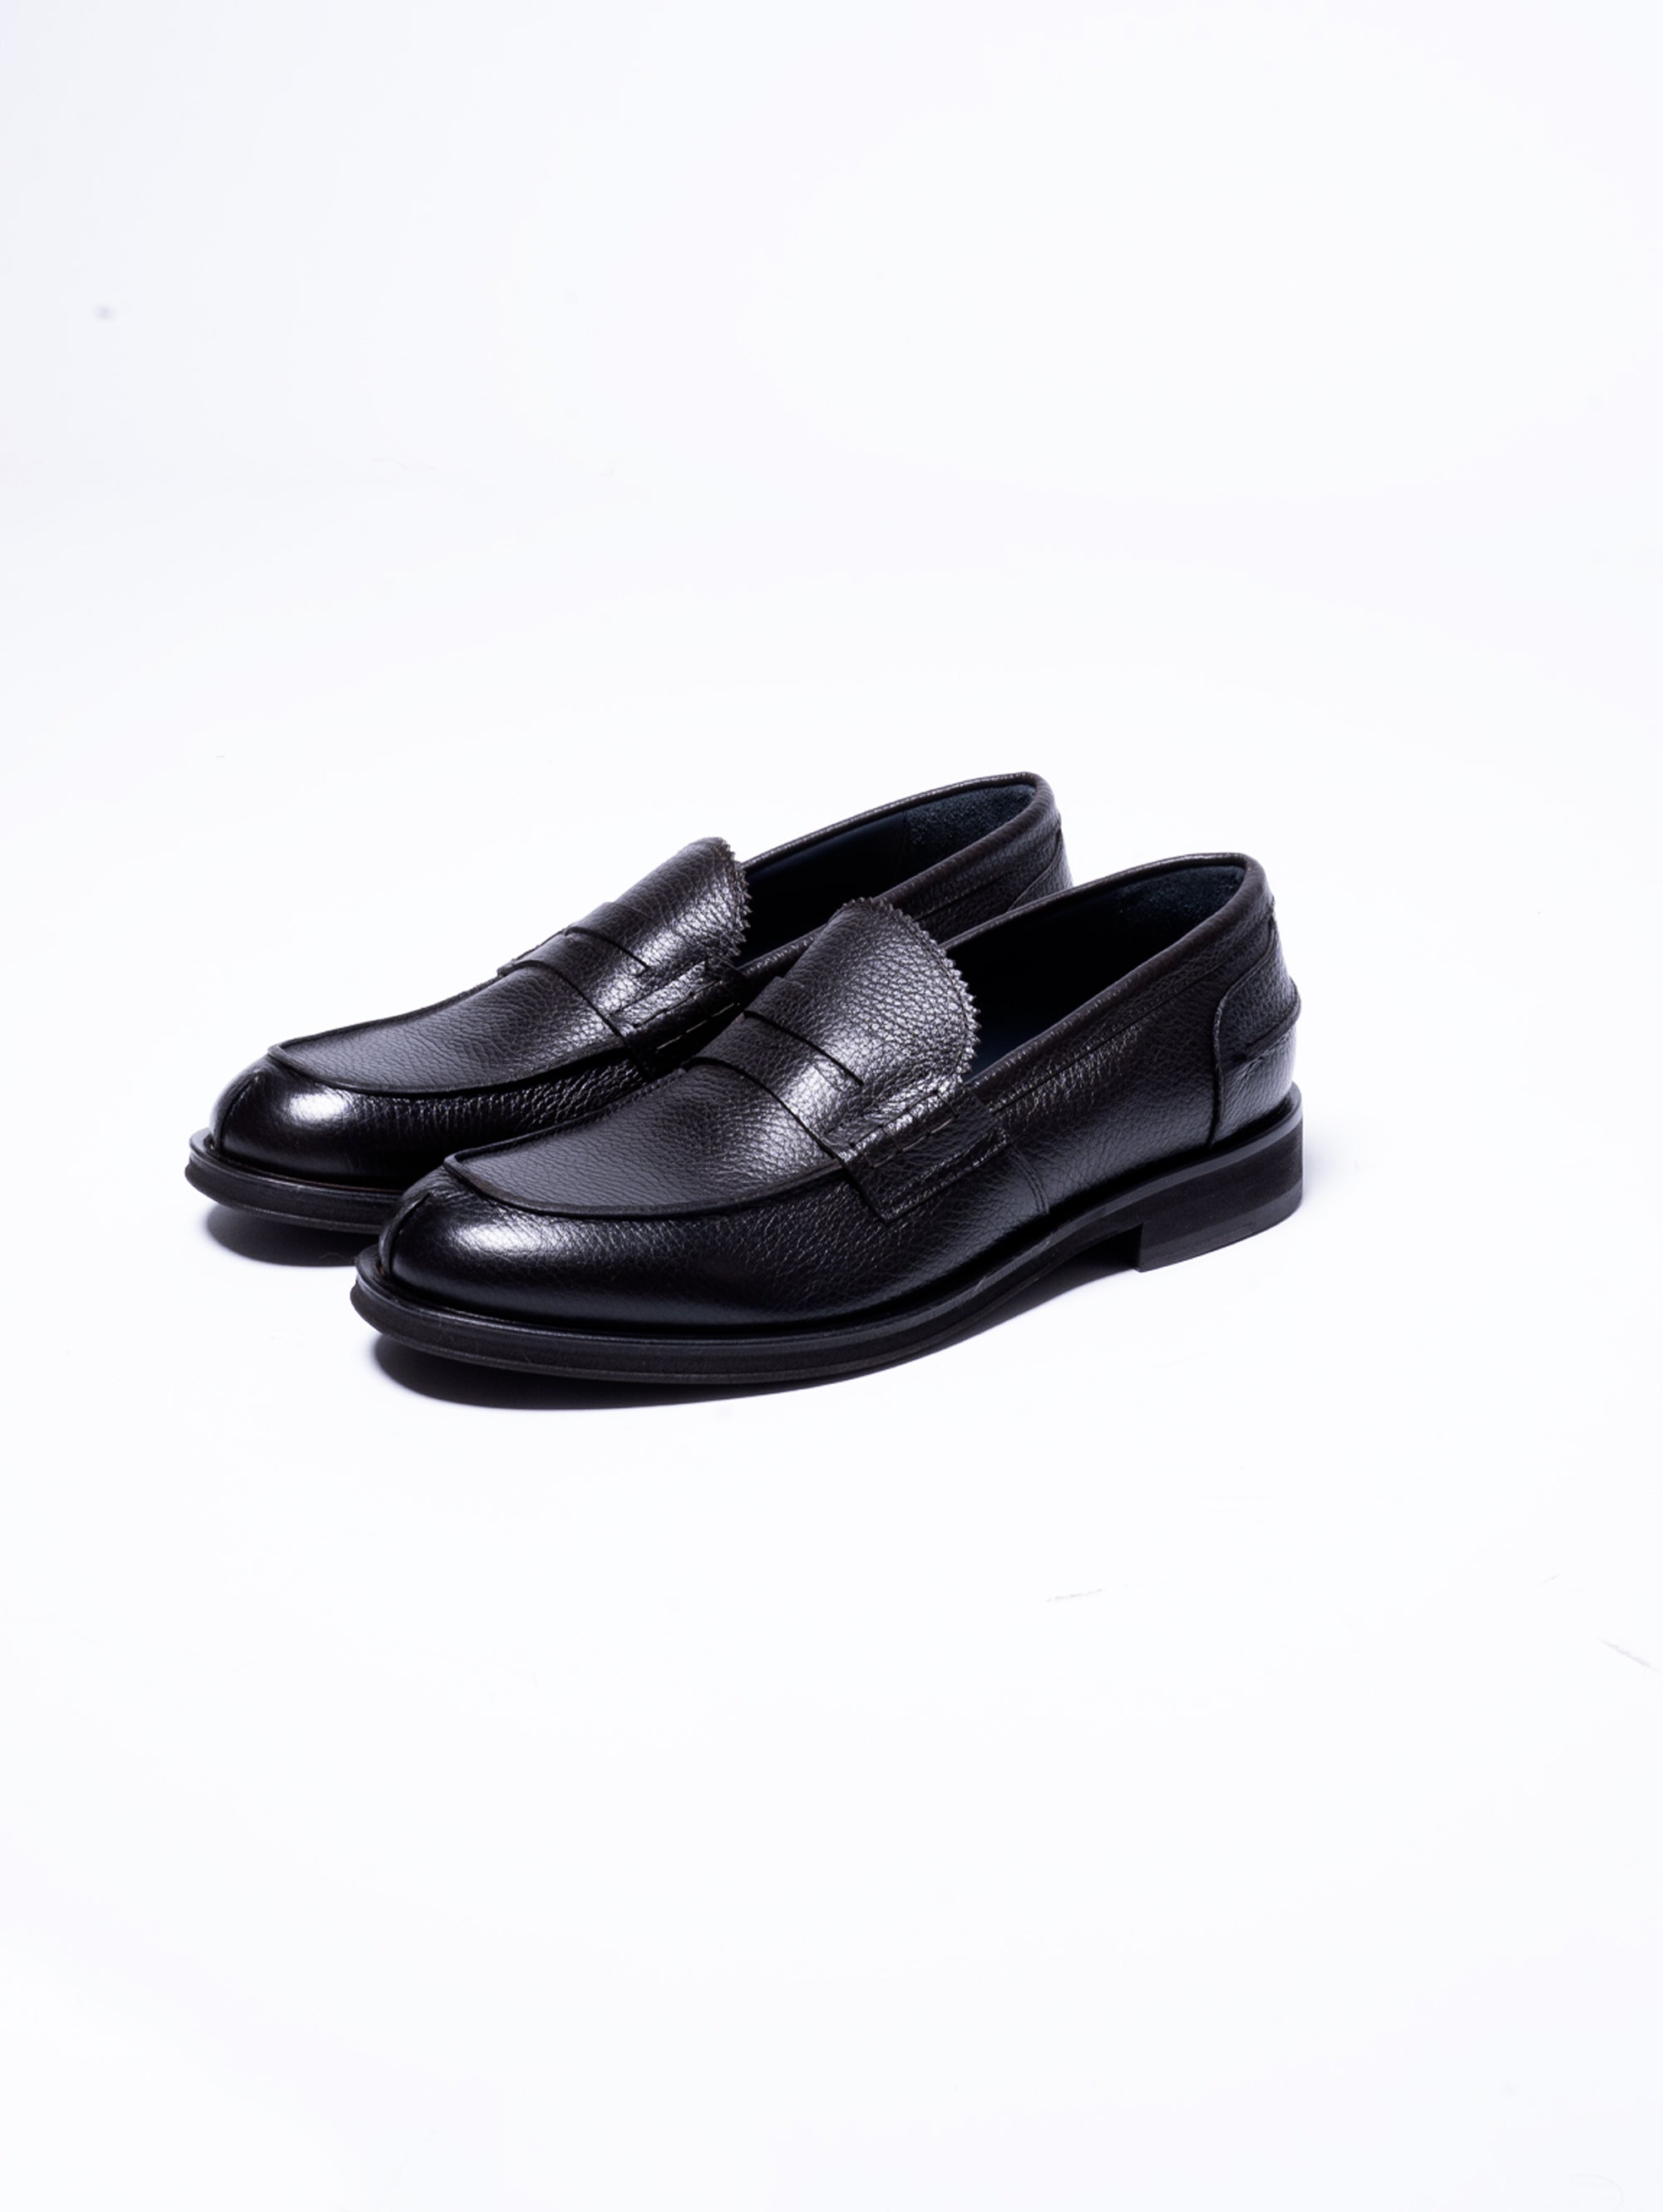 Penny Loafer Moccasin in Dark Brown Grained Leather